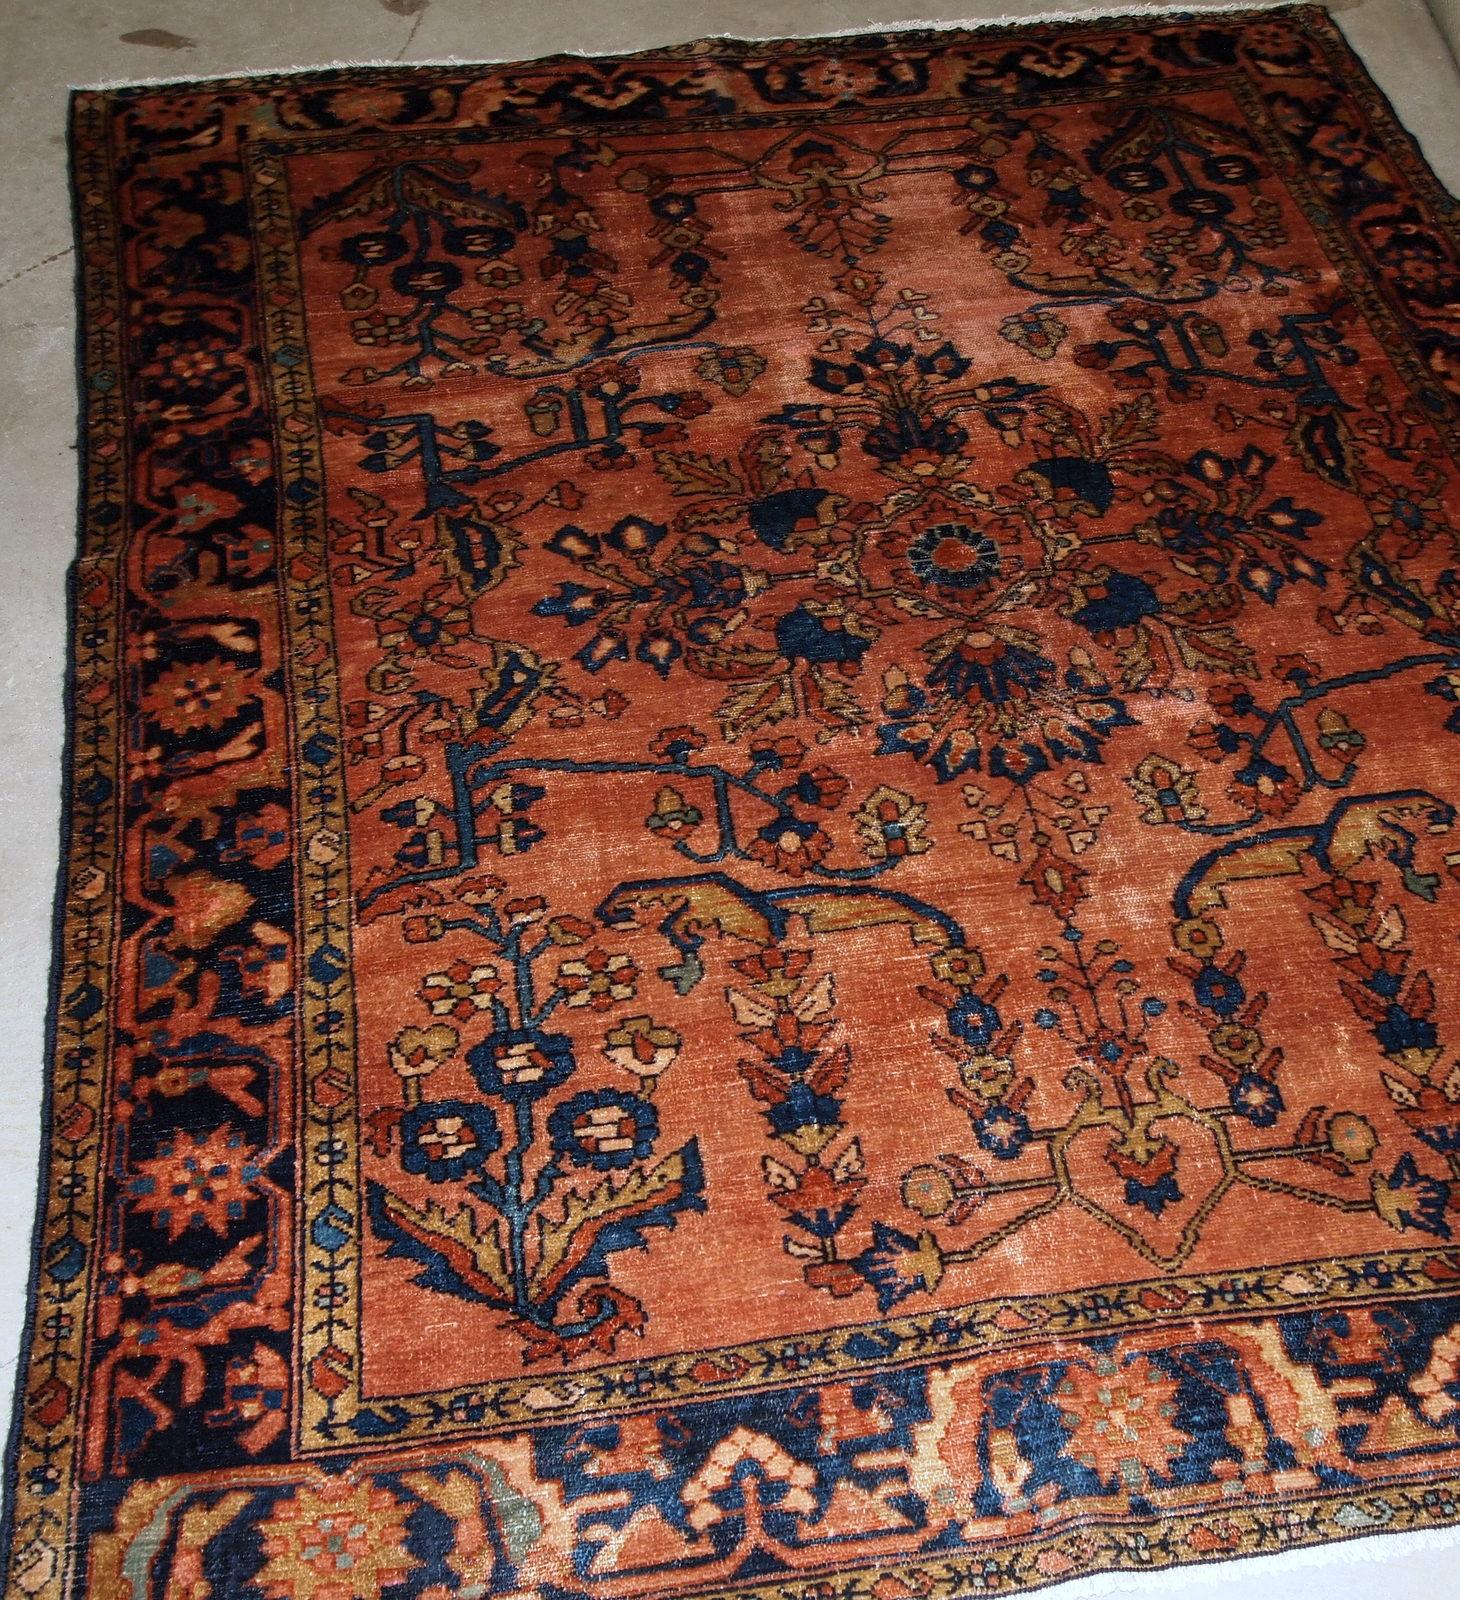 Antique handwoven Lilihan rug from Middle East in red wool. The rug is from the beginning of 20th century, in original condition, it has some low pile.

- Condition: original, some low pile,

- circa 1910s

- Size: 5.3' x 6.9' (161cm x